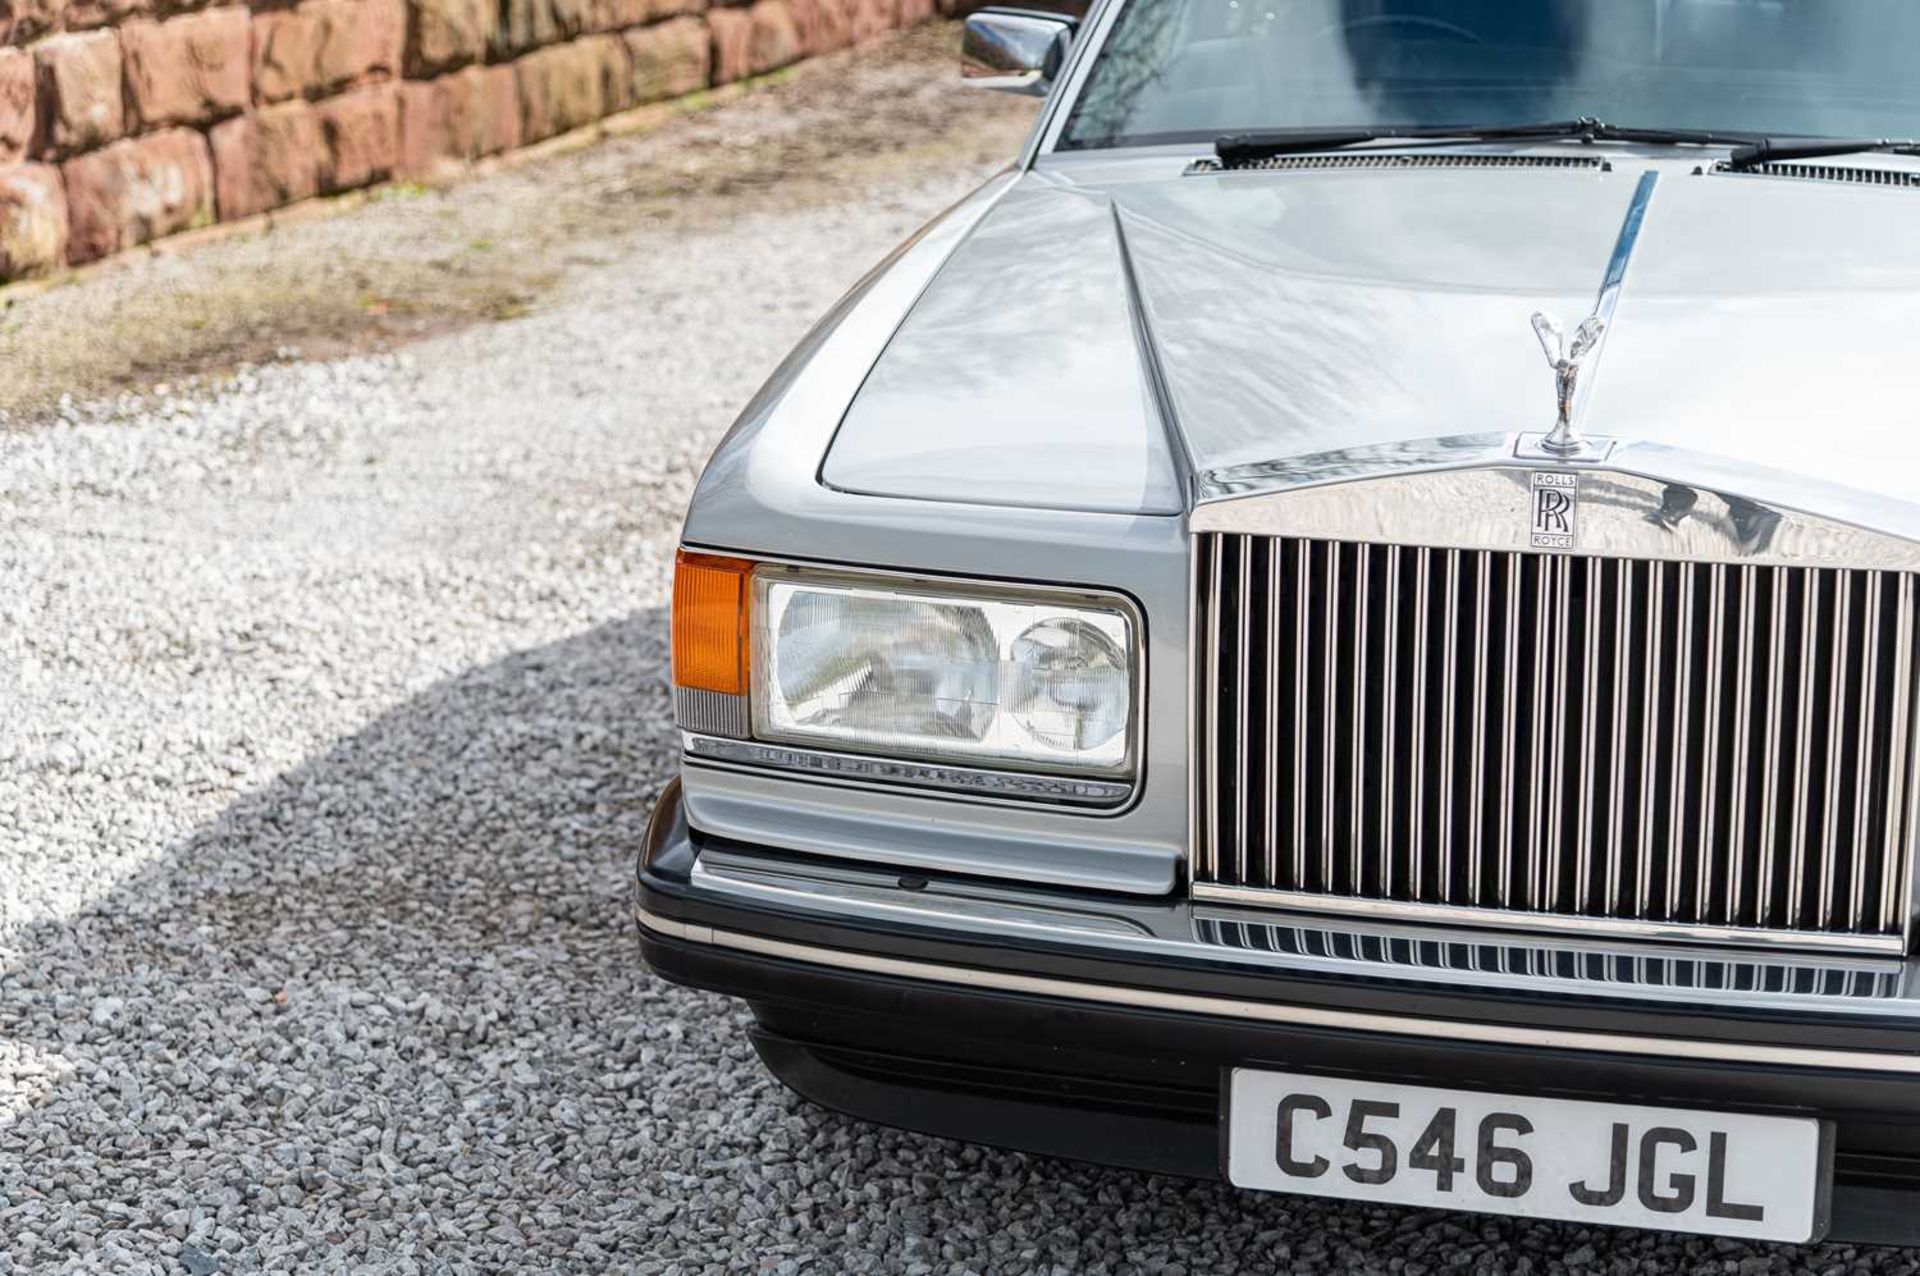 1985 Rolls Royce Silver Spirit From long term ownership, comes complete with comprehensive history f - Image 18 of 79